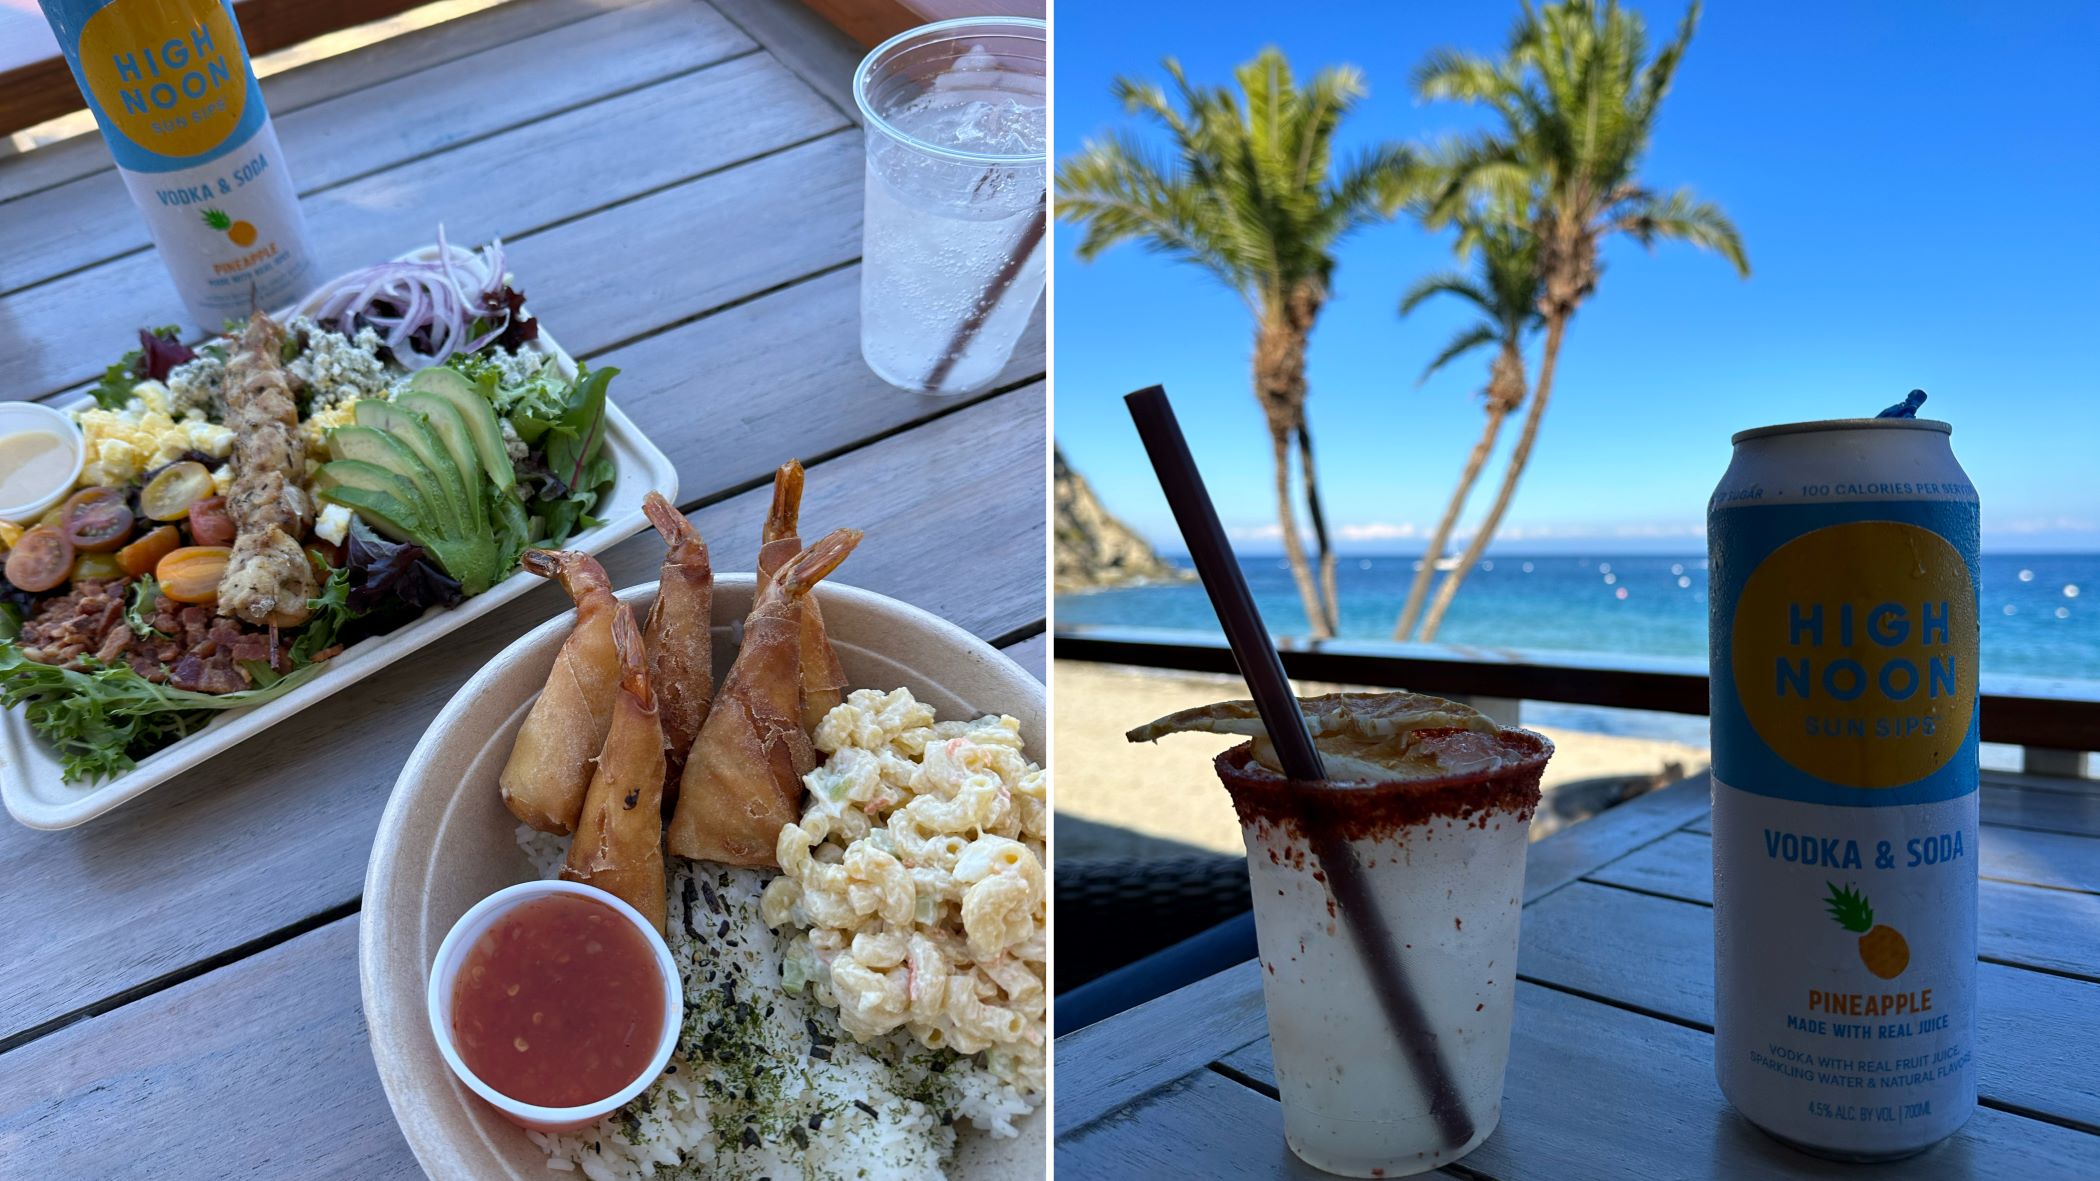 An image of food and cocktails from Descanso Beach Club.